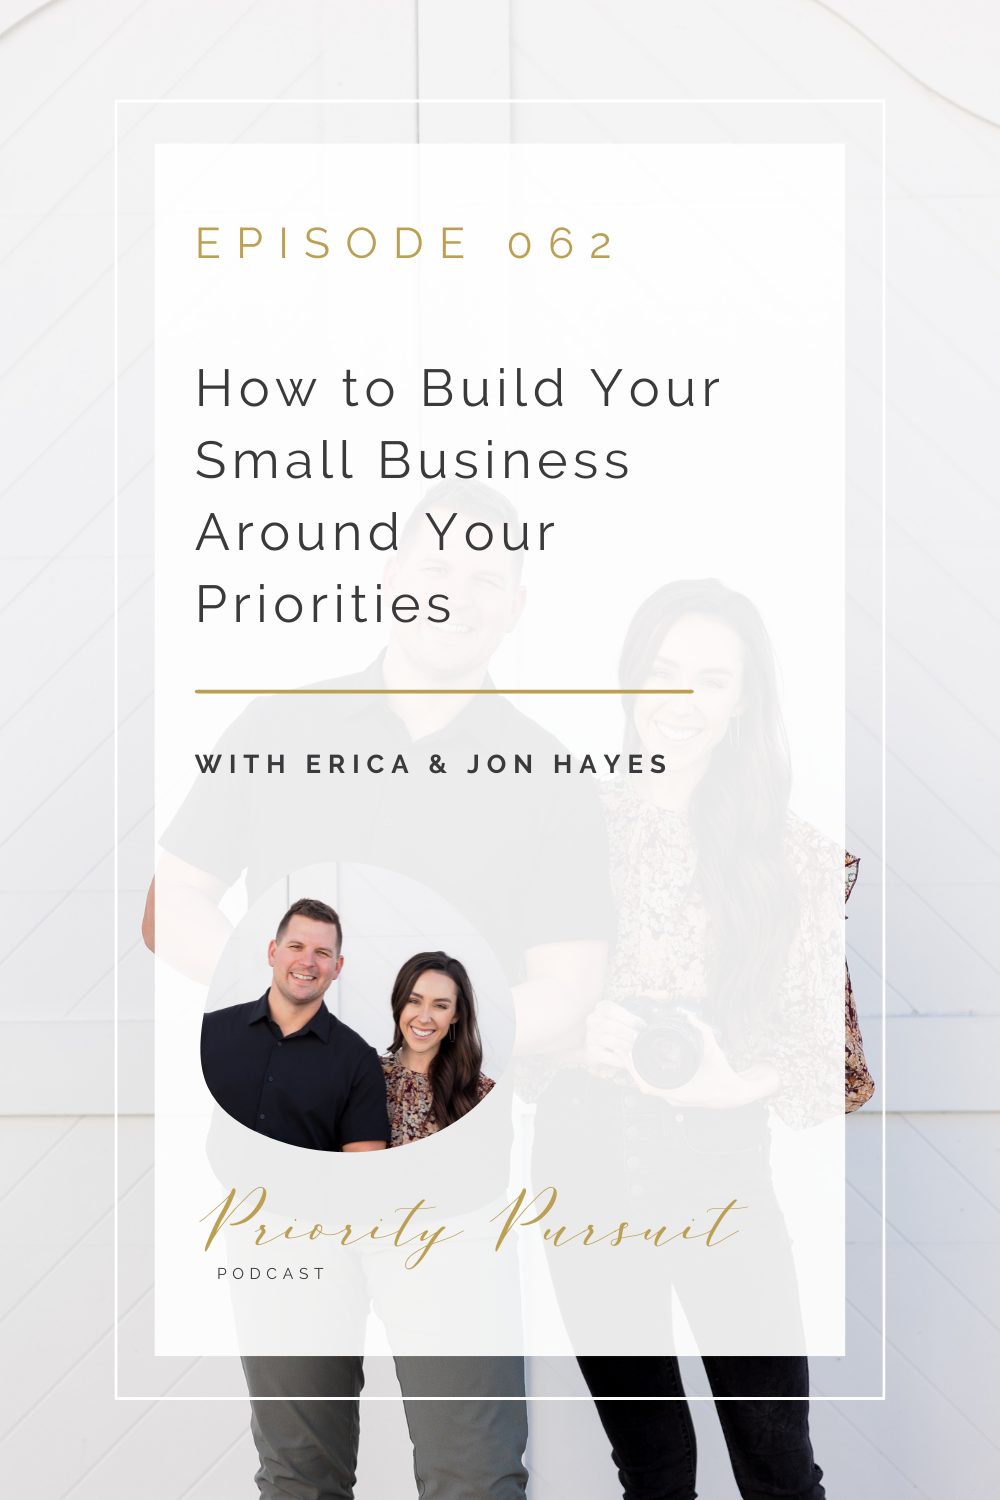 Victoria Rayburn and Erica and Jon Hayes discuss how you can build your small business around your priorities.